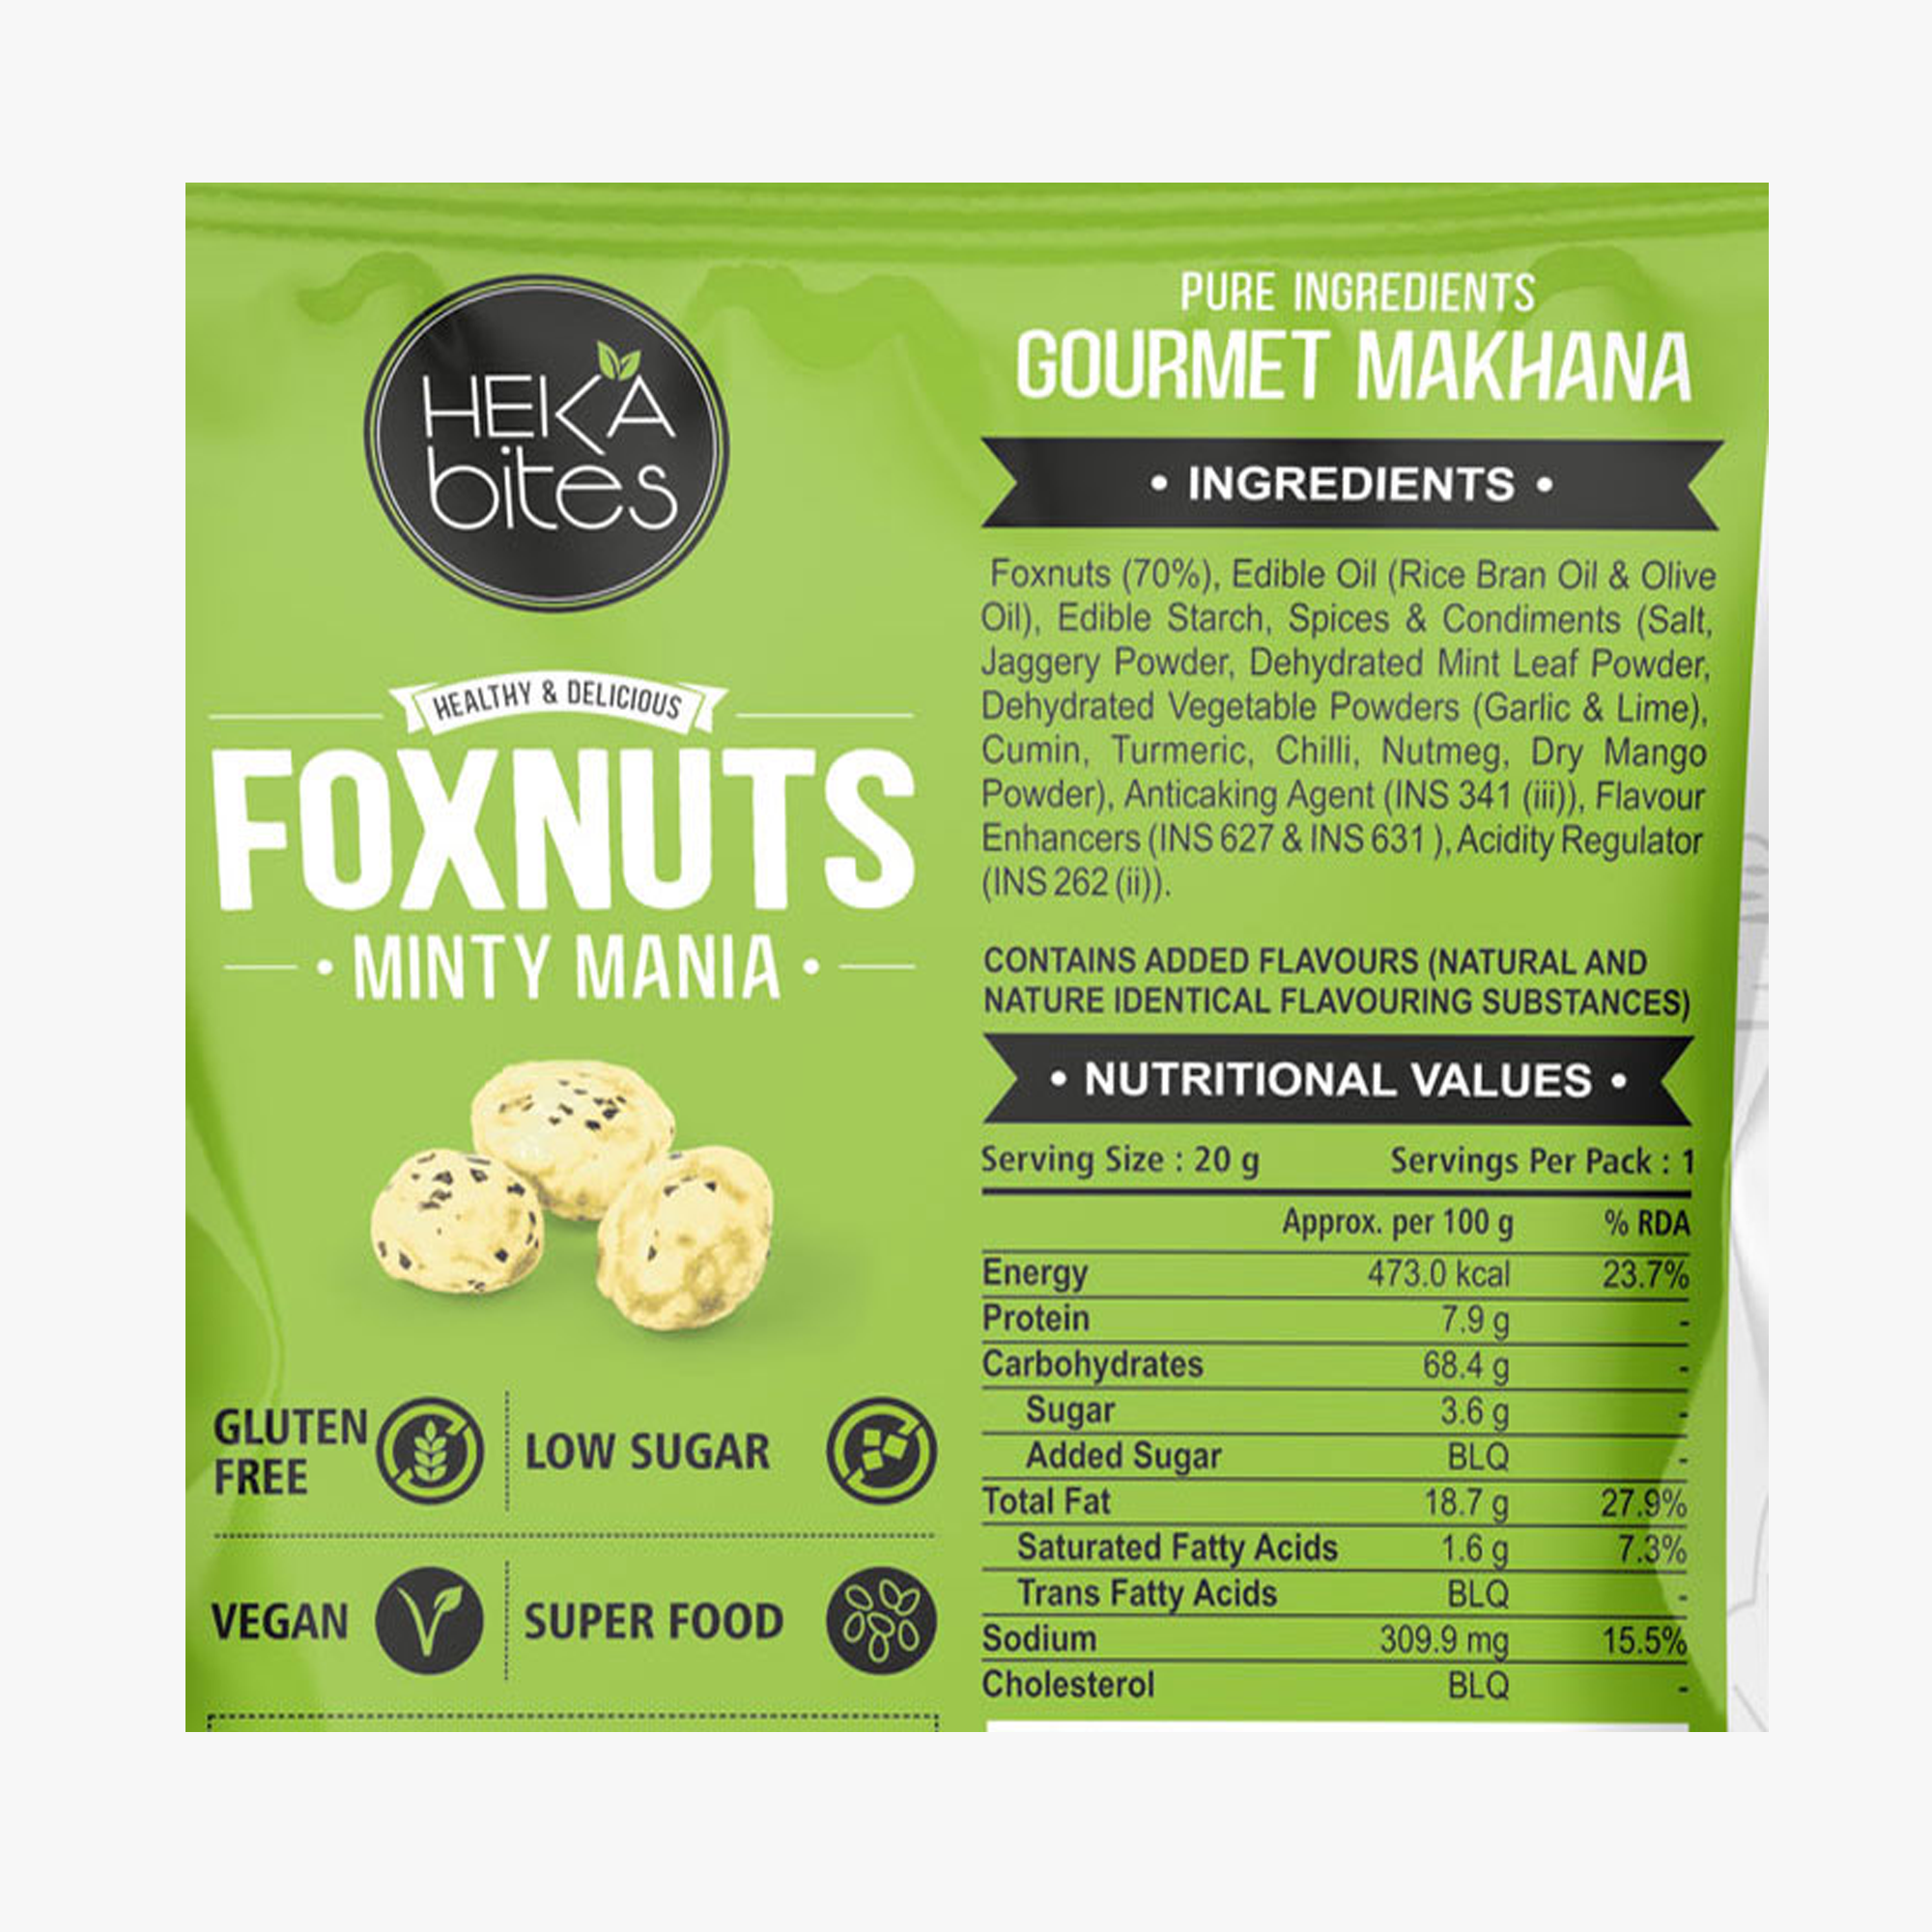 Roasted Fox Nuts Minty Mania 80g (Pack of 2)